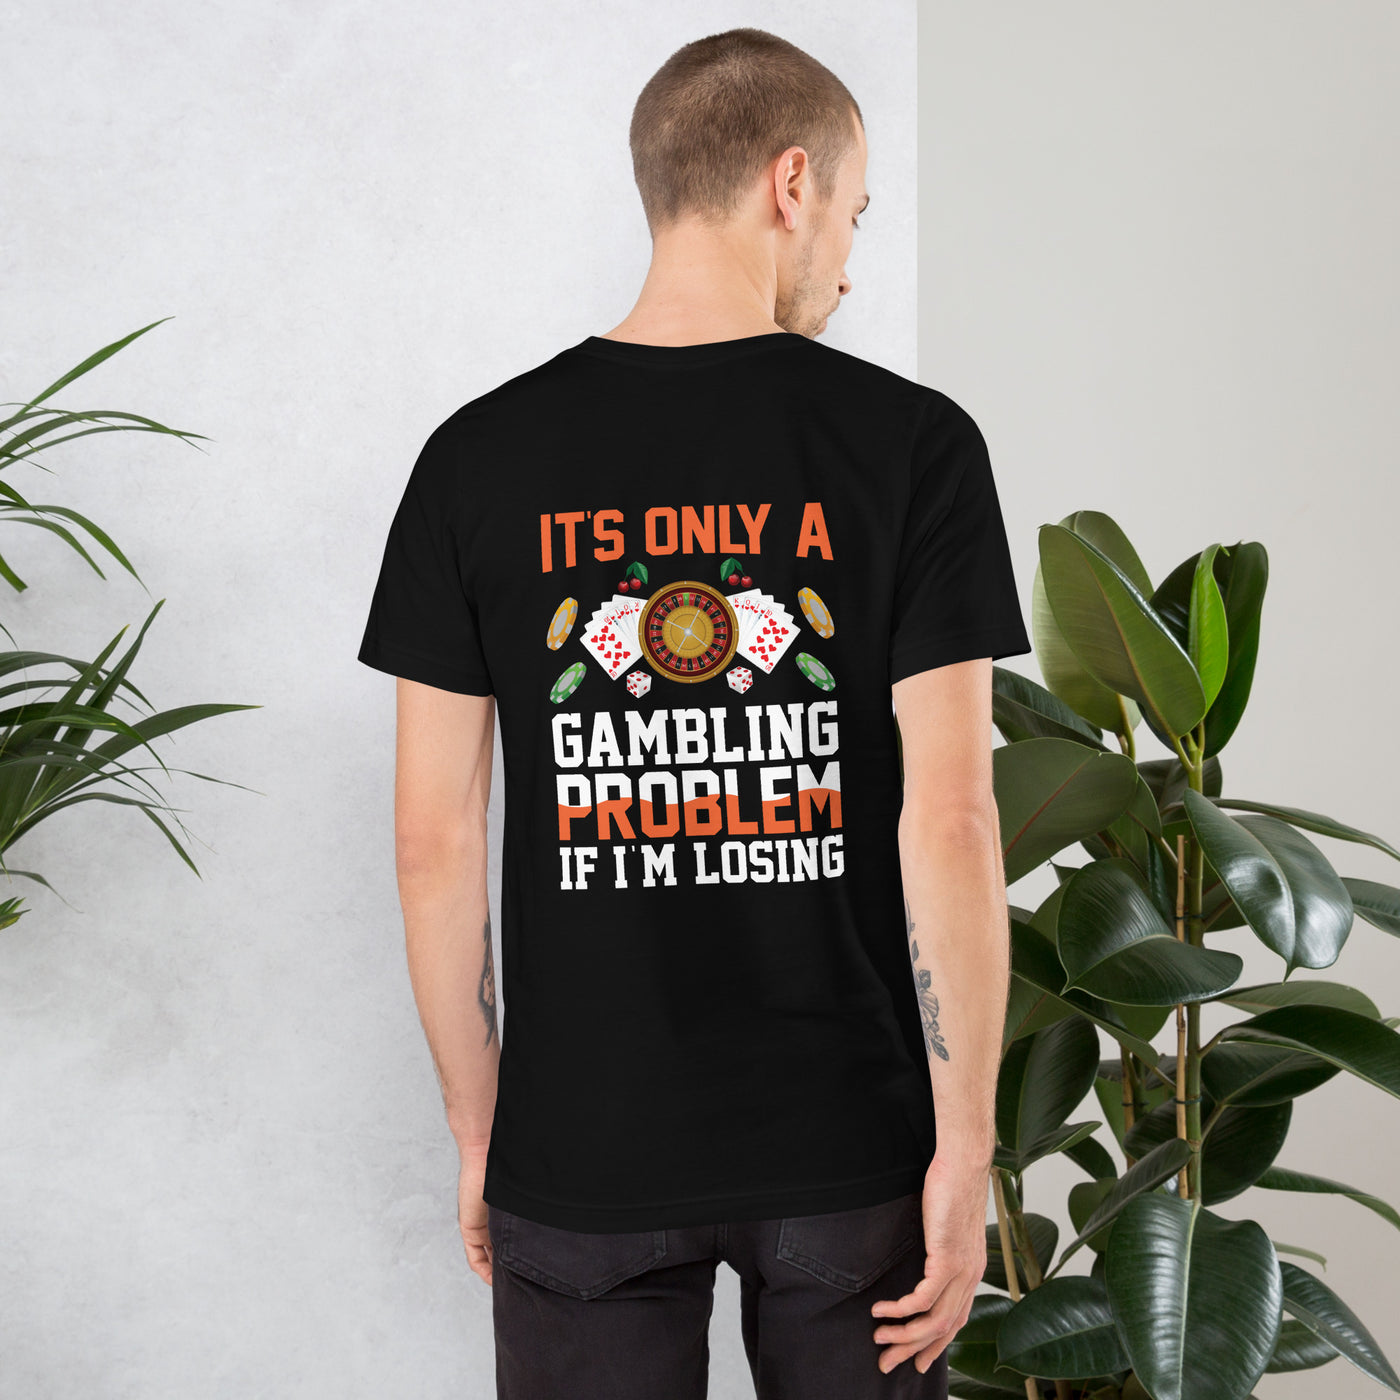 It's only a Gambling Problem, if I am losing - Unisex t-shirt ( Back Print )